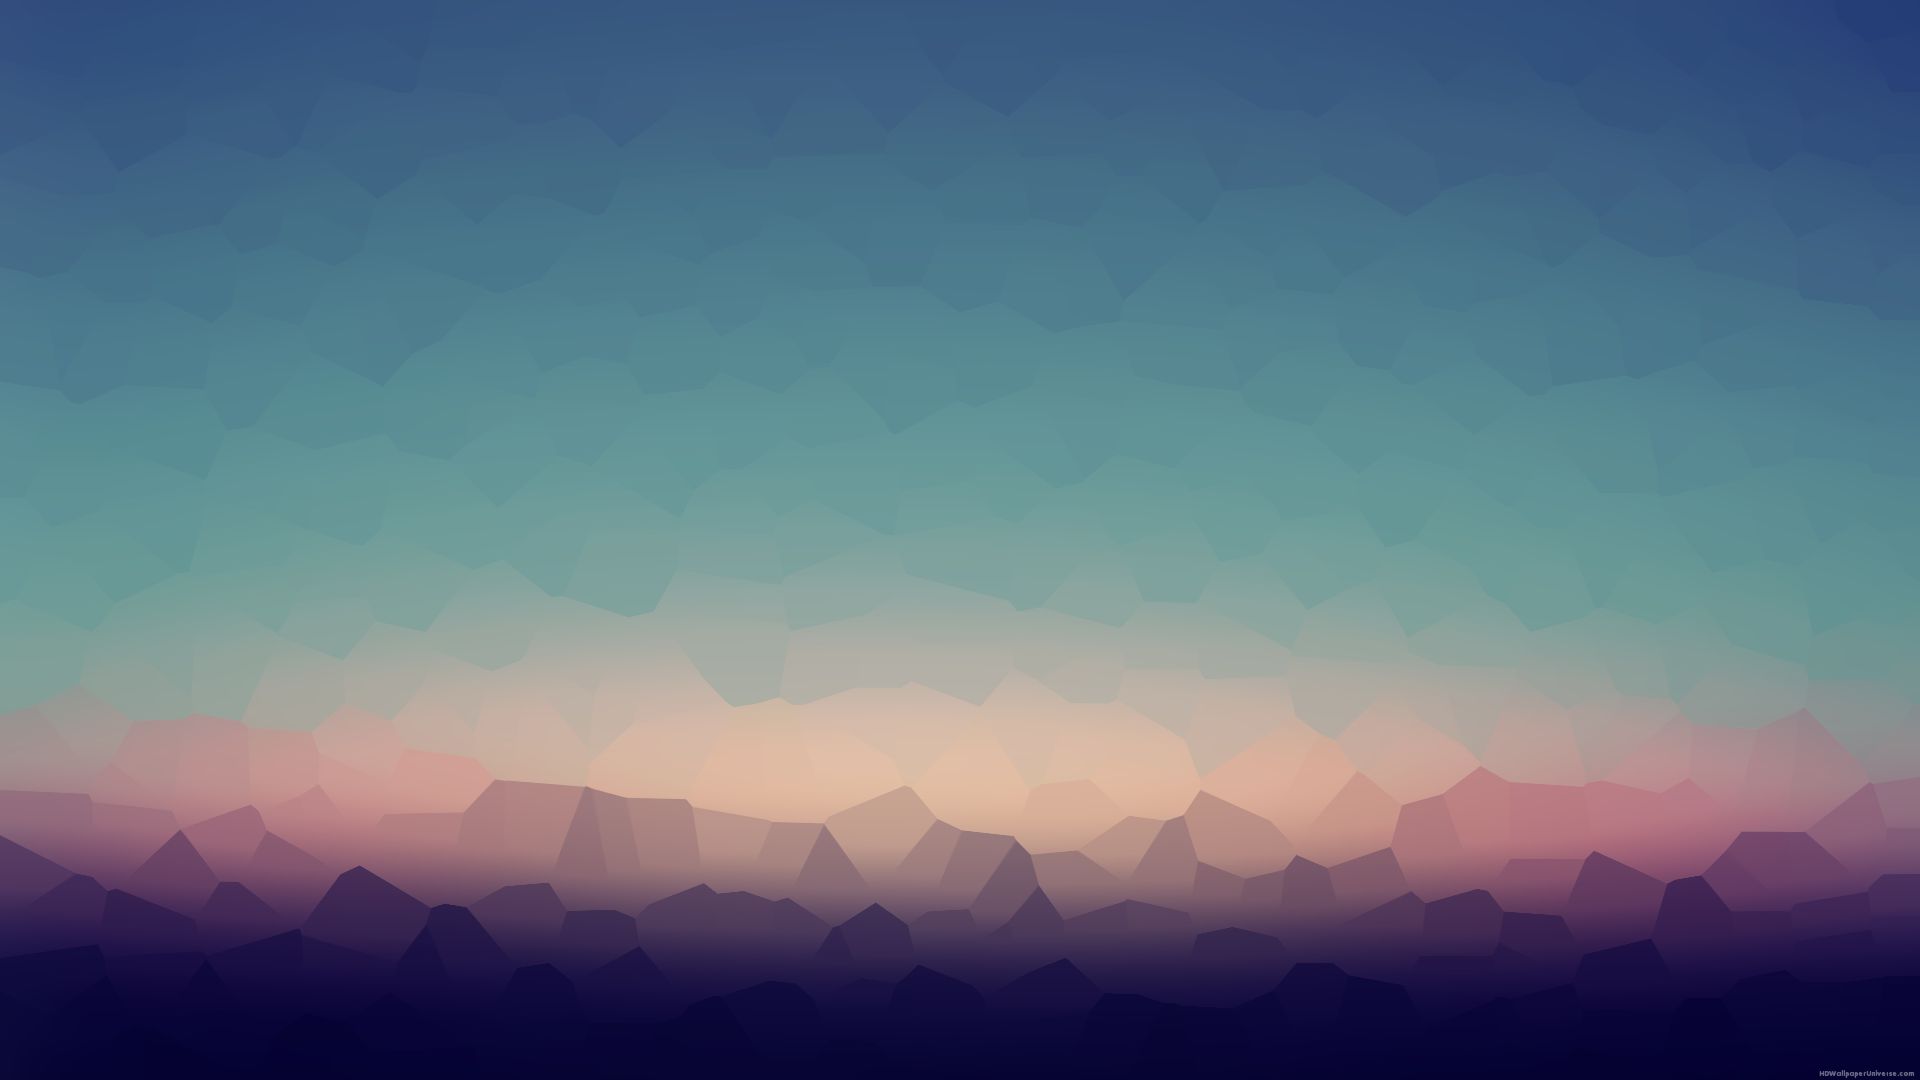 Aesthetic Backgrounds & Wallpapers - Download for Free